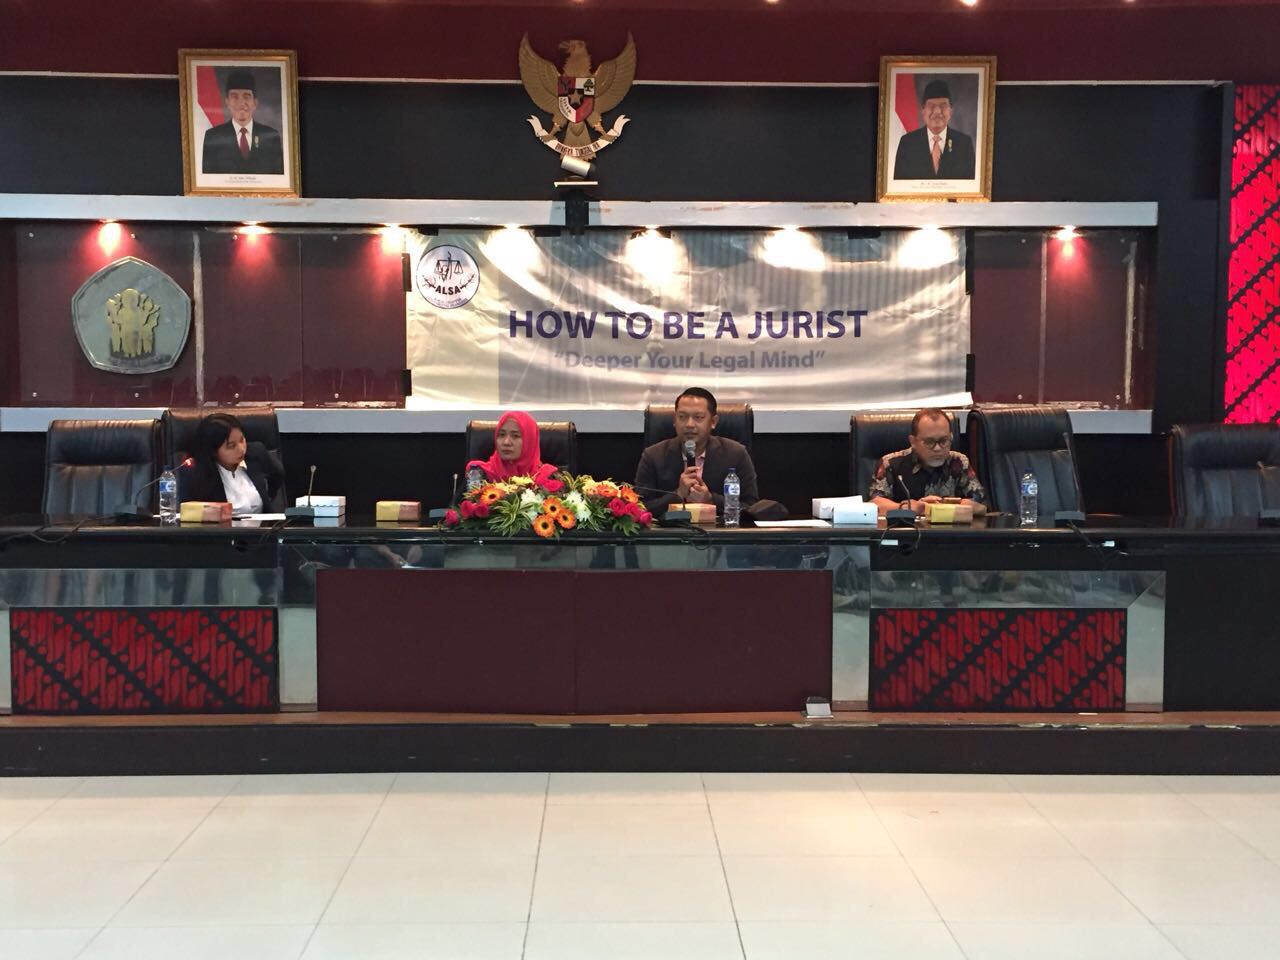 You are currently viewing Asean Law Student Association Local Chapter Brawijaya University (ALSA LC FH UB): “How To Be A Jurist”